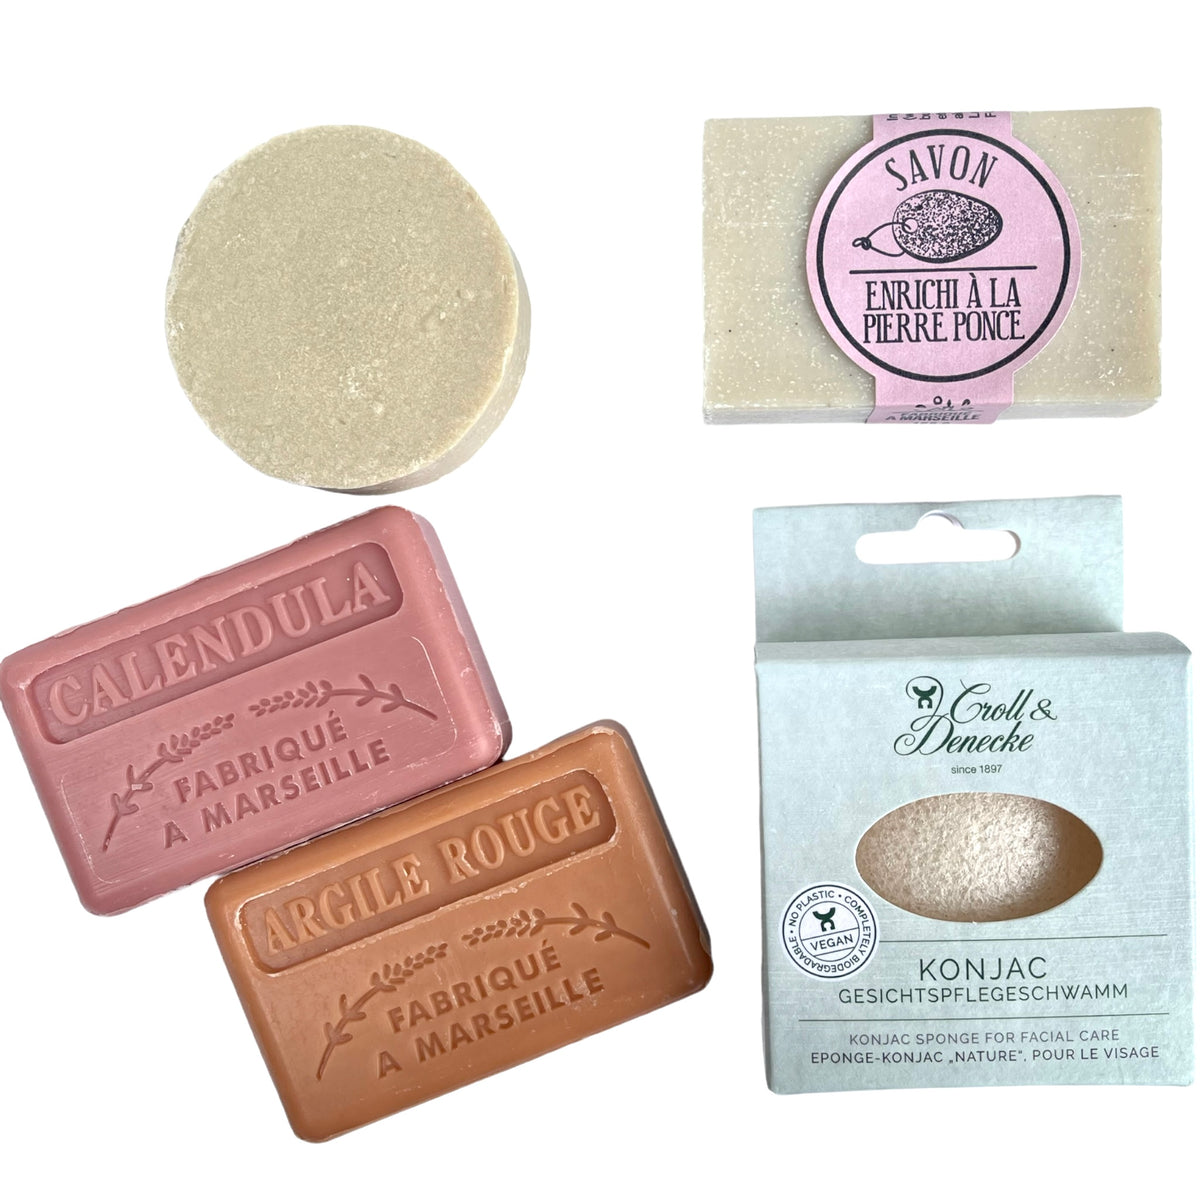 Top to Toe - Soap Gift Set